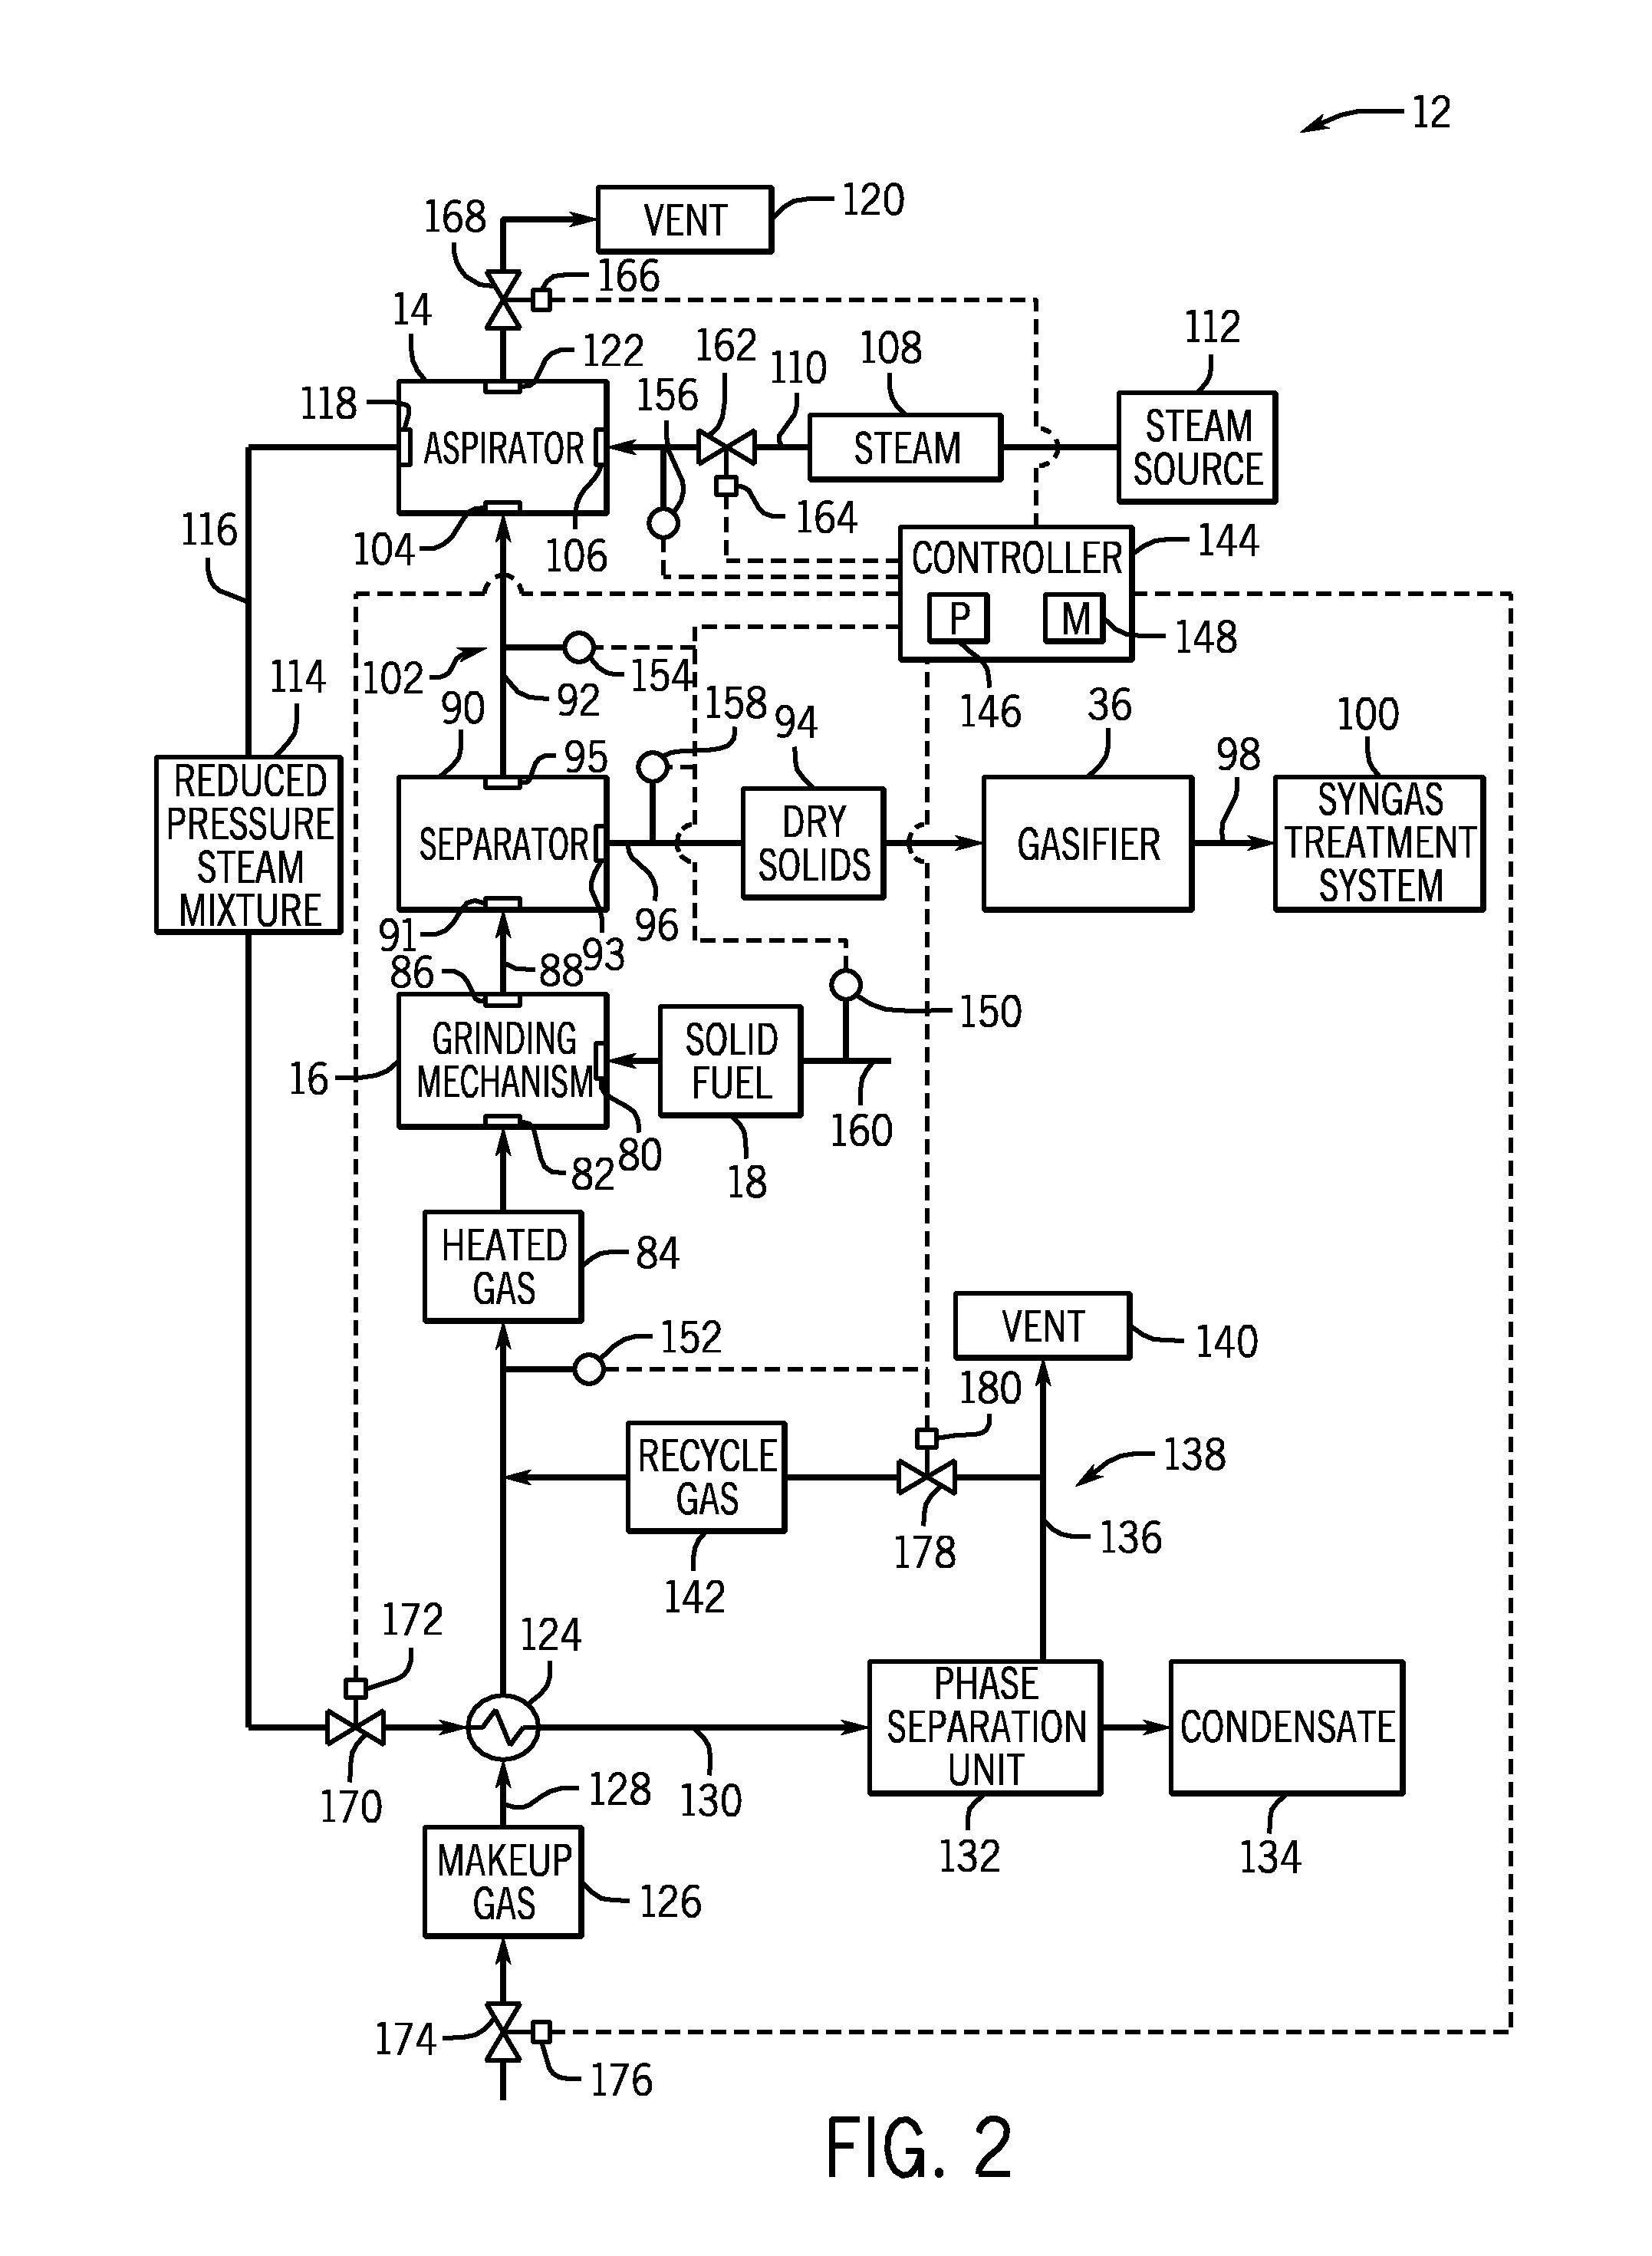 System for drying a gasification feed